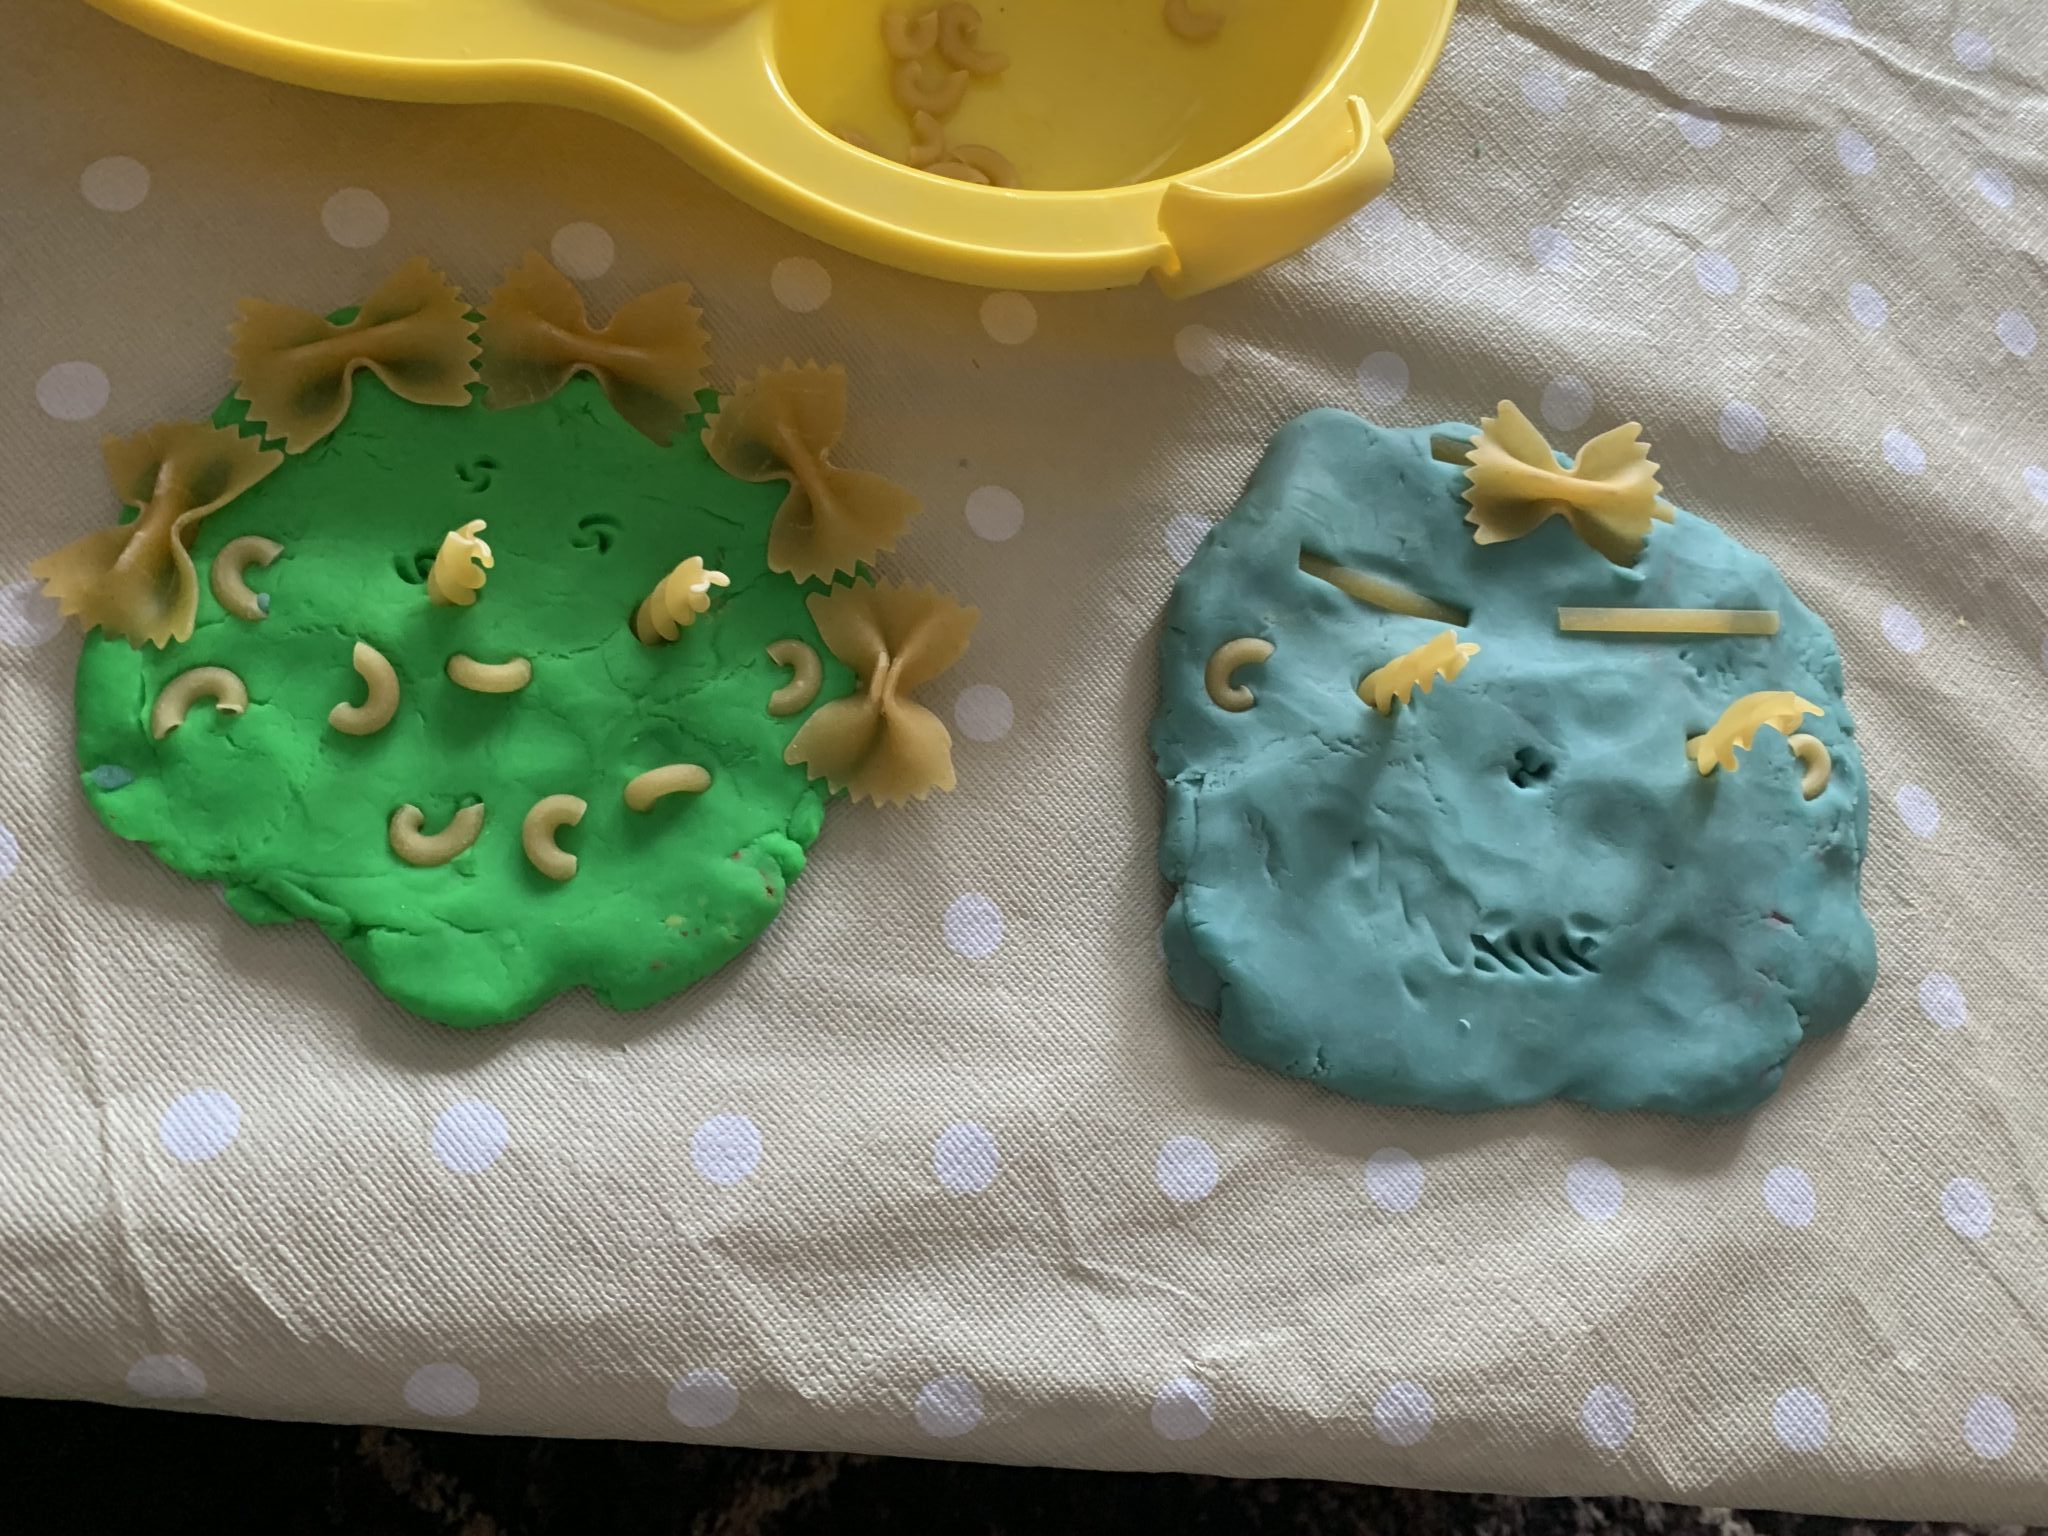 Grab your play dough, pasta and your smiles because it’s time to create a Family portraits activity that’s simple enough toddlers can do it!